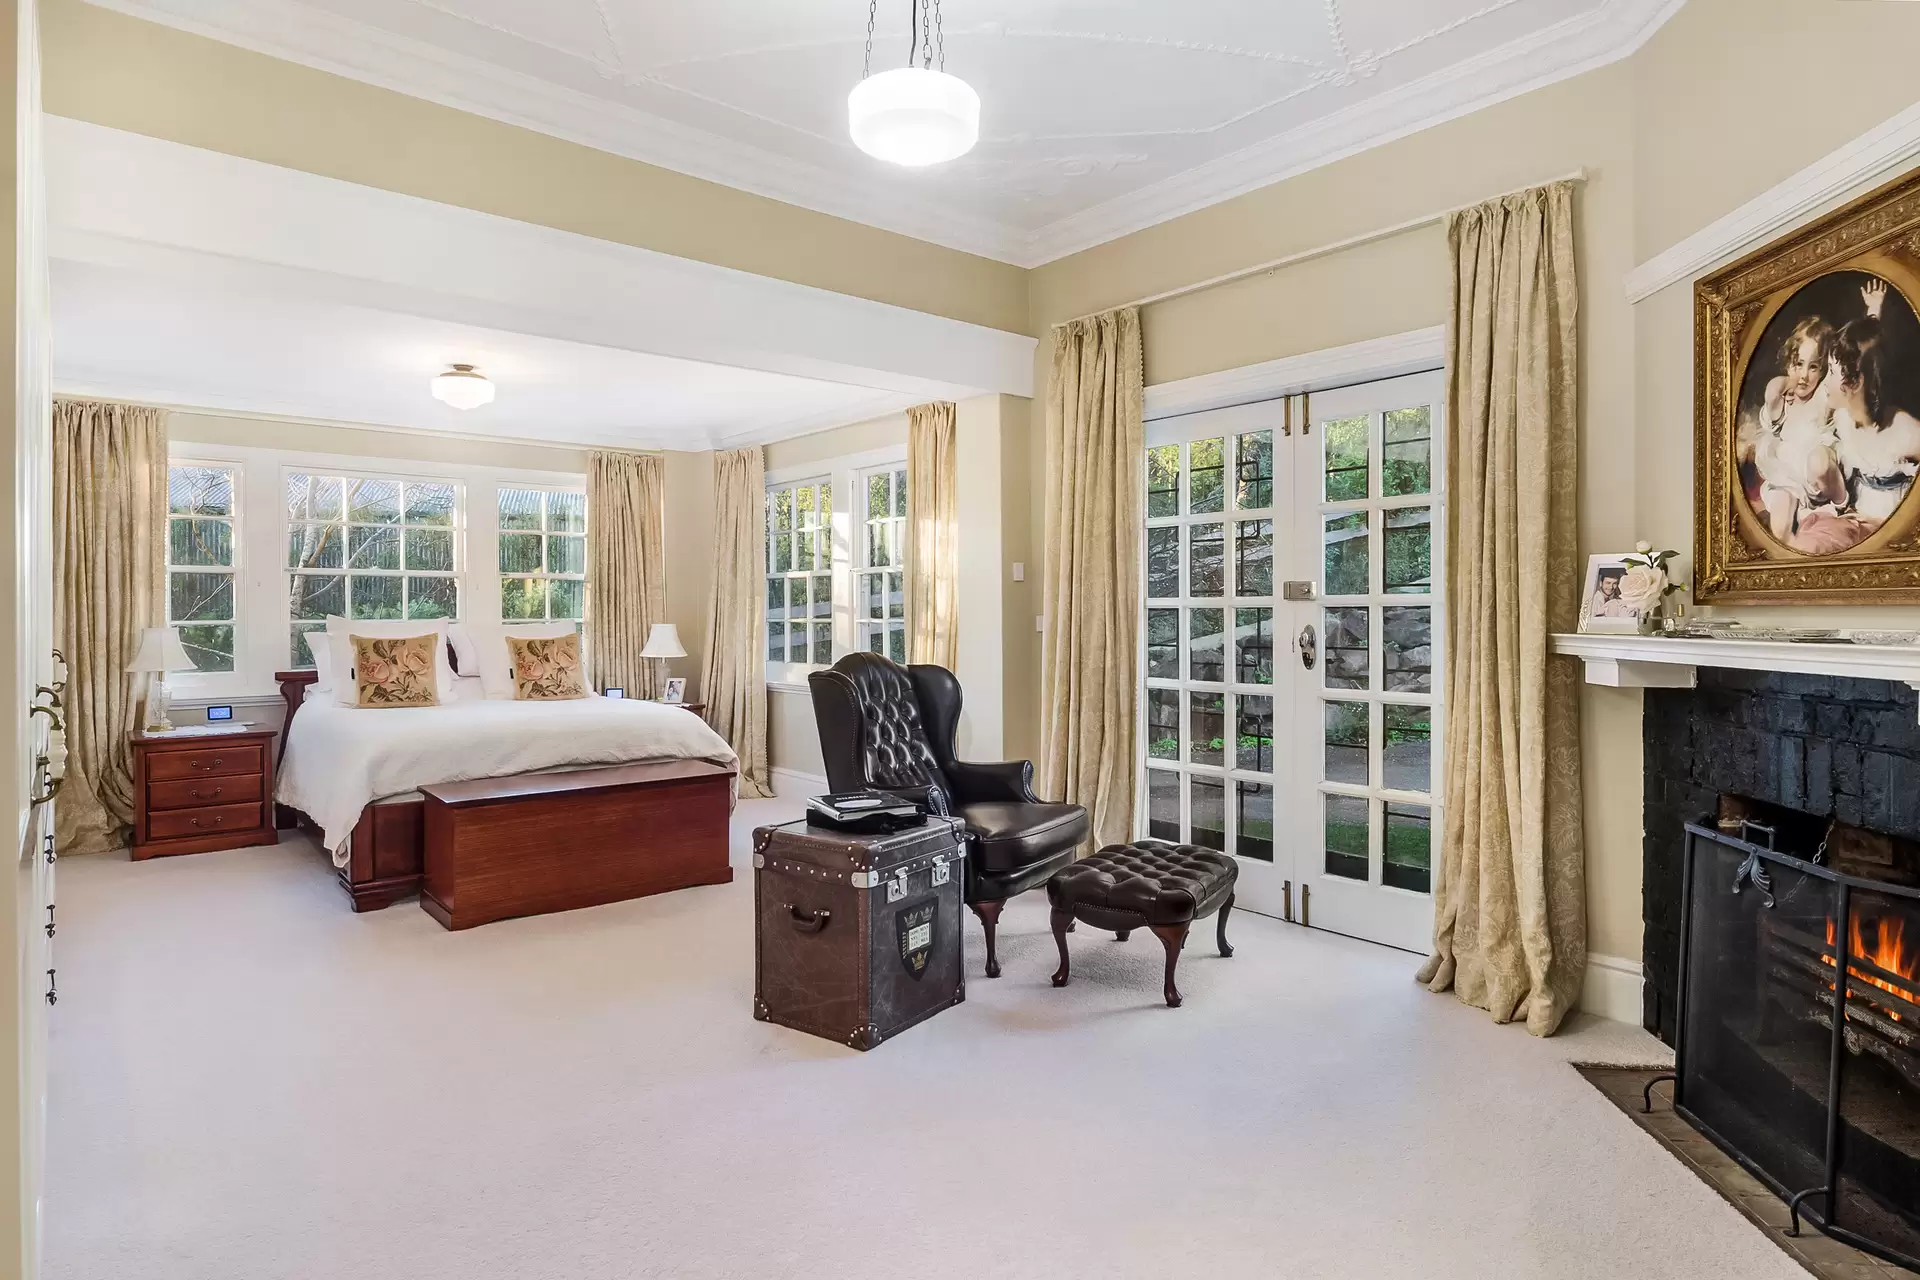 Photo #10: 24 Queen Street, Bowral - For Sale by Drew Lindsay Sotheby's International Realty